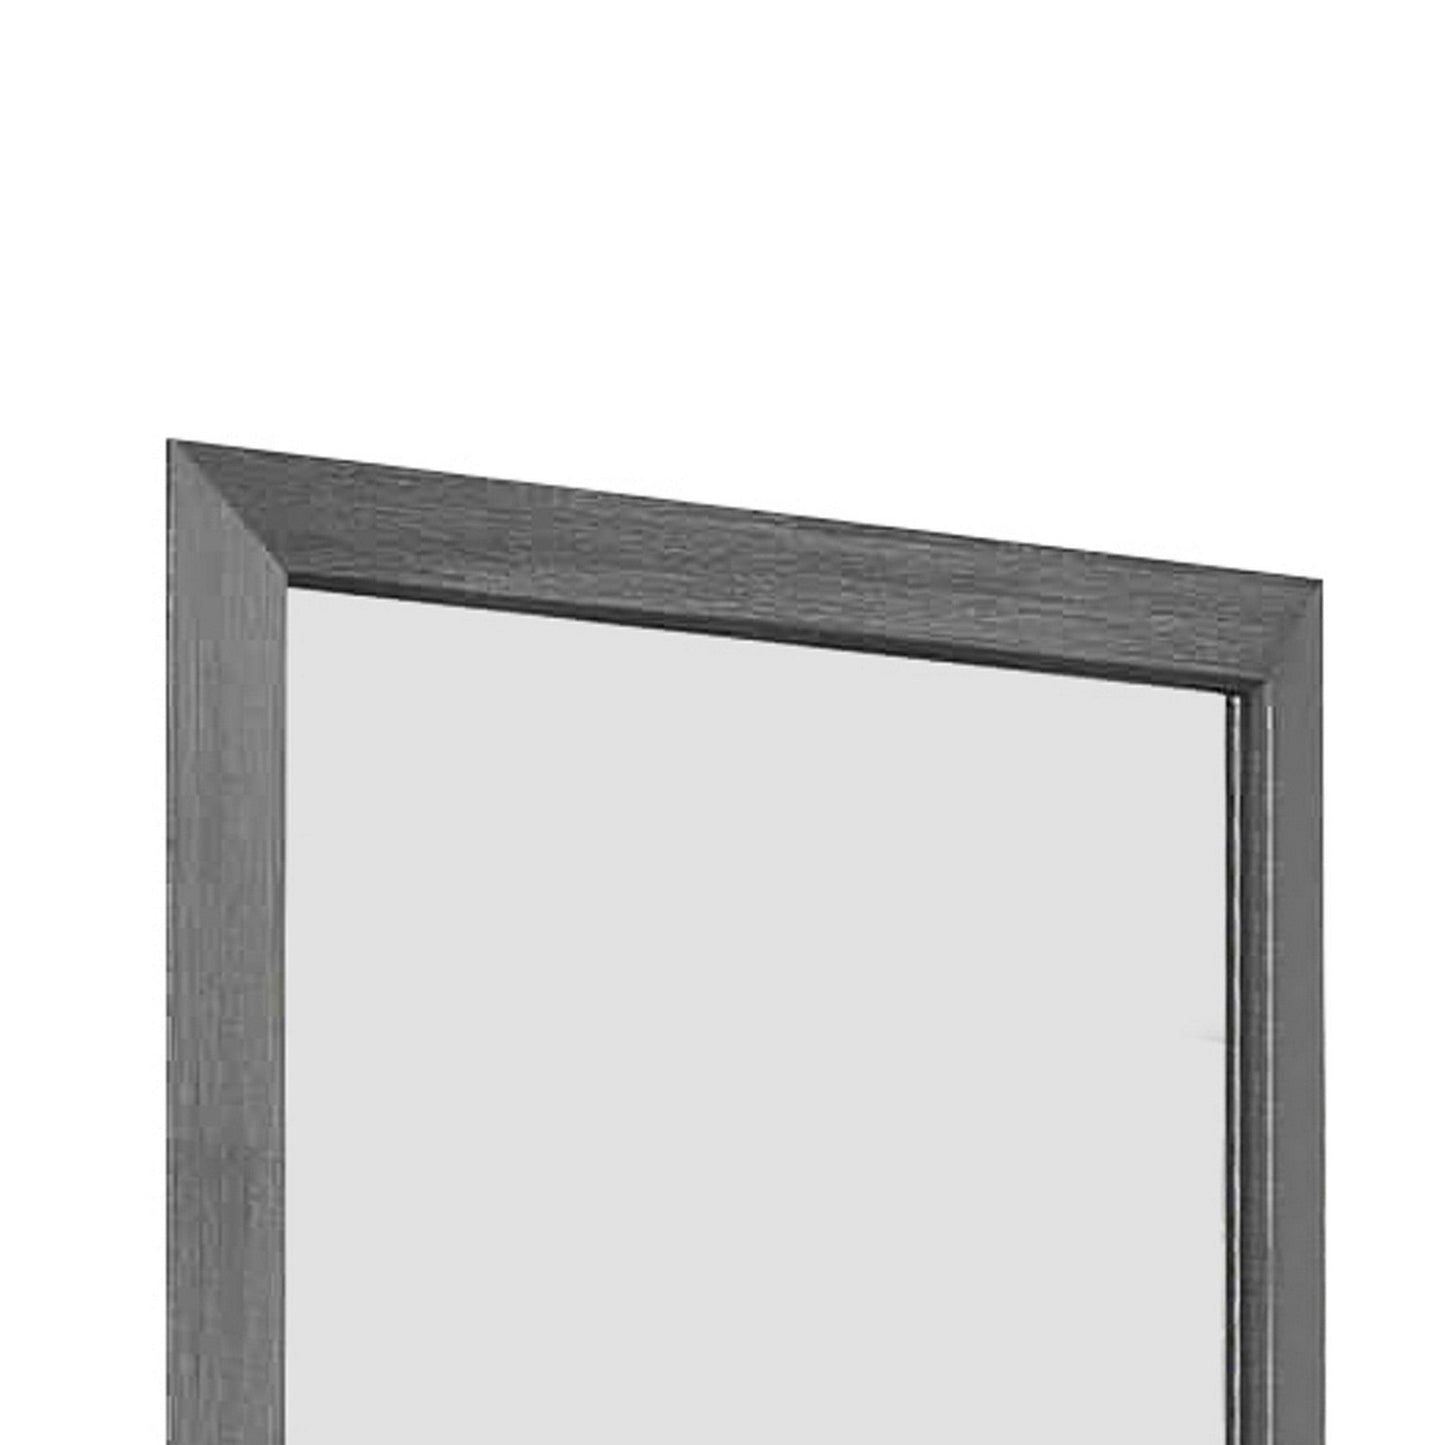 Benzara Gray Transitional Style Wooden Frame Mirror With Grain Details